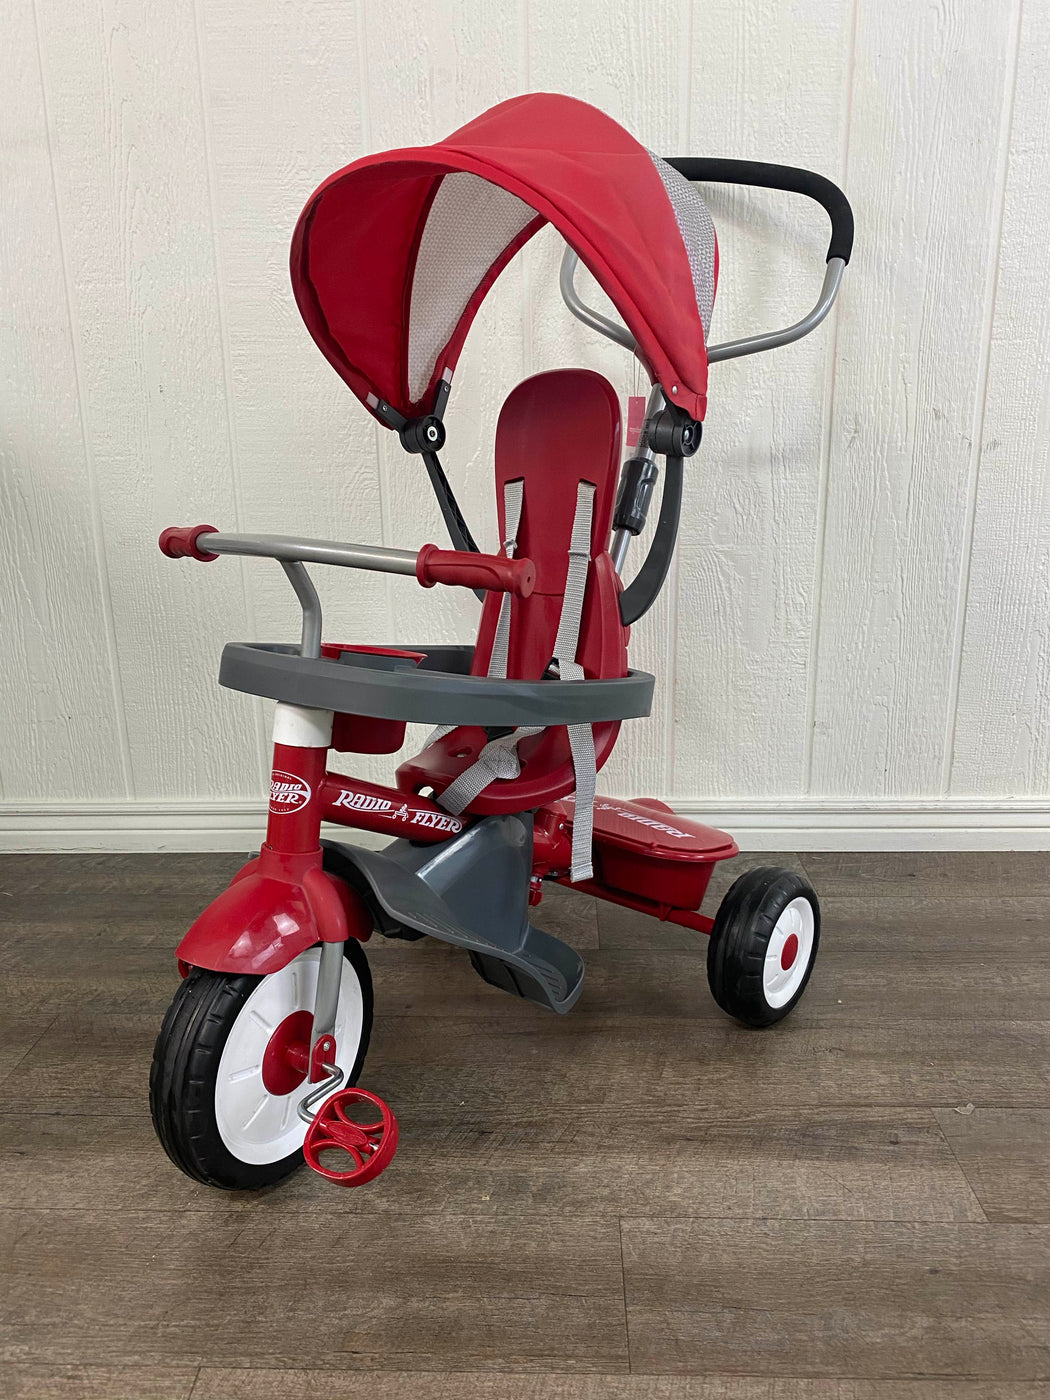 4 in 1 stroll and trike